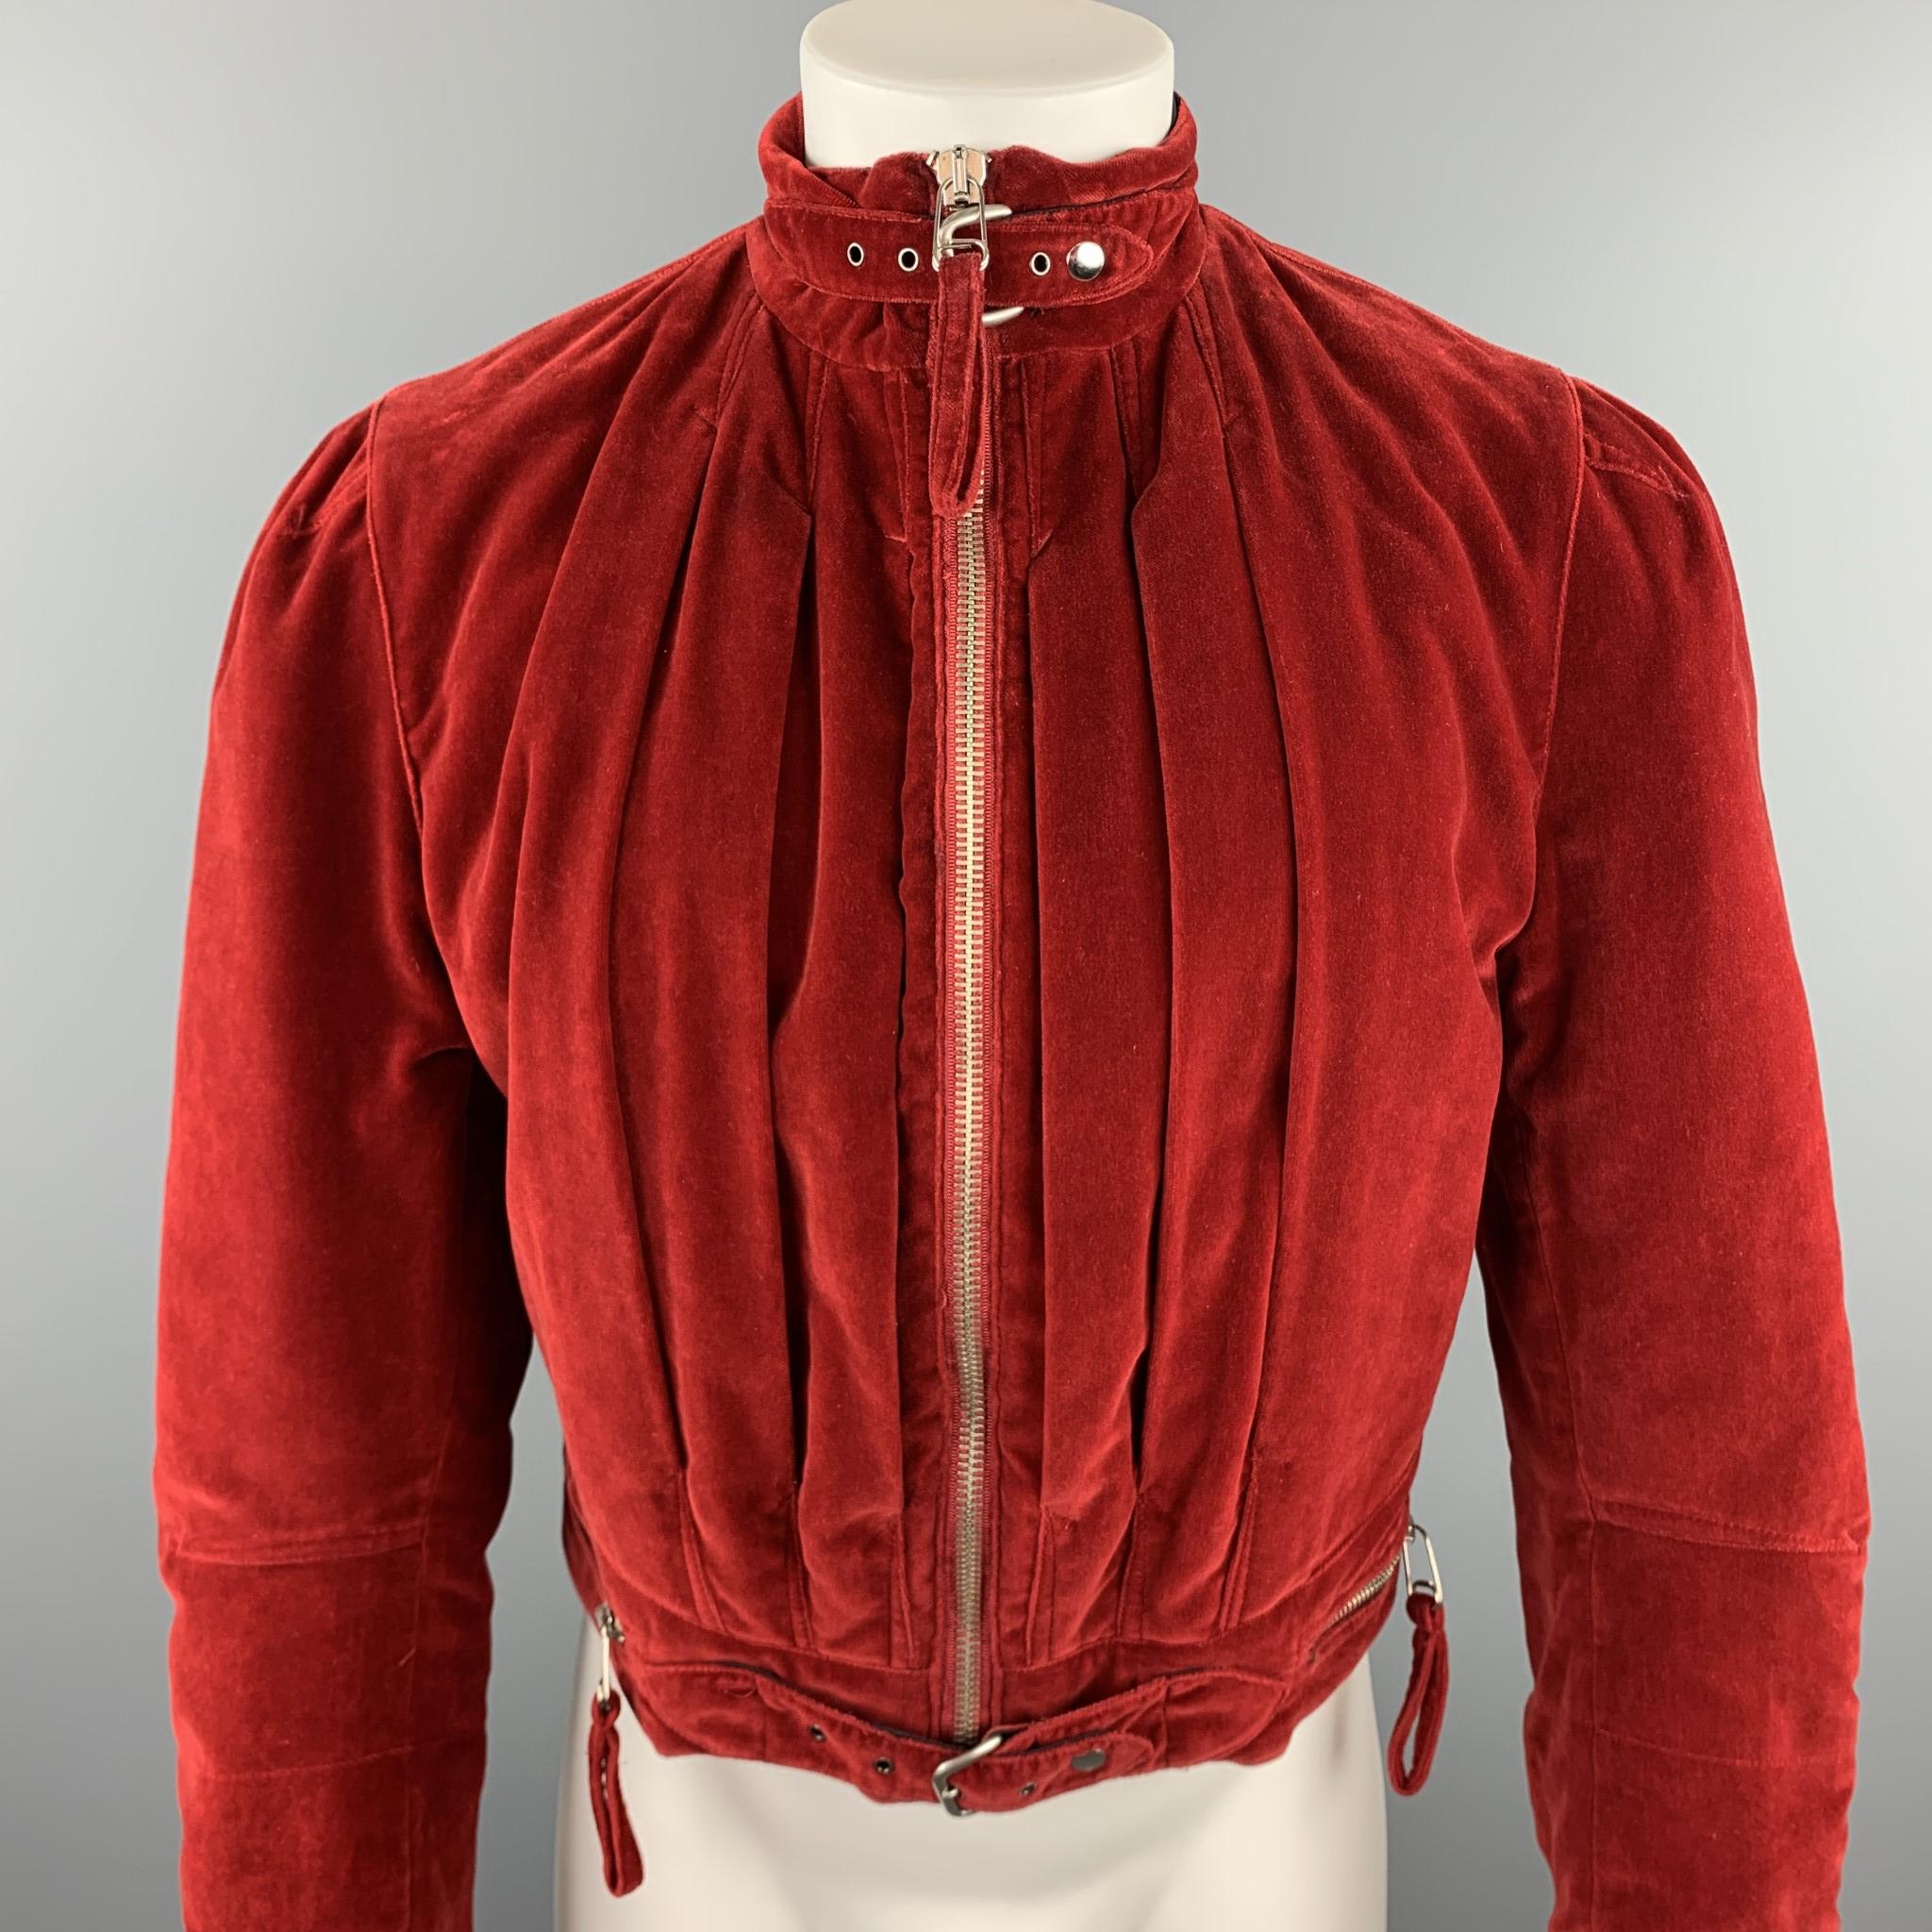 Vintage JEAN PAUL GAULTIER HOMME jacket comes in a red velvet featuring a cropped style, zipper pockets, belted details, and a zip up closure. Discolorations at back. As-Is. Made in Italy.

Good Pre-Owned Condition.
Marked: No size